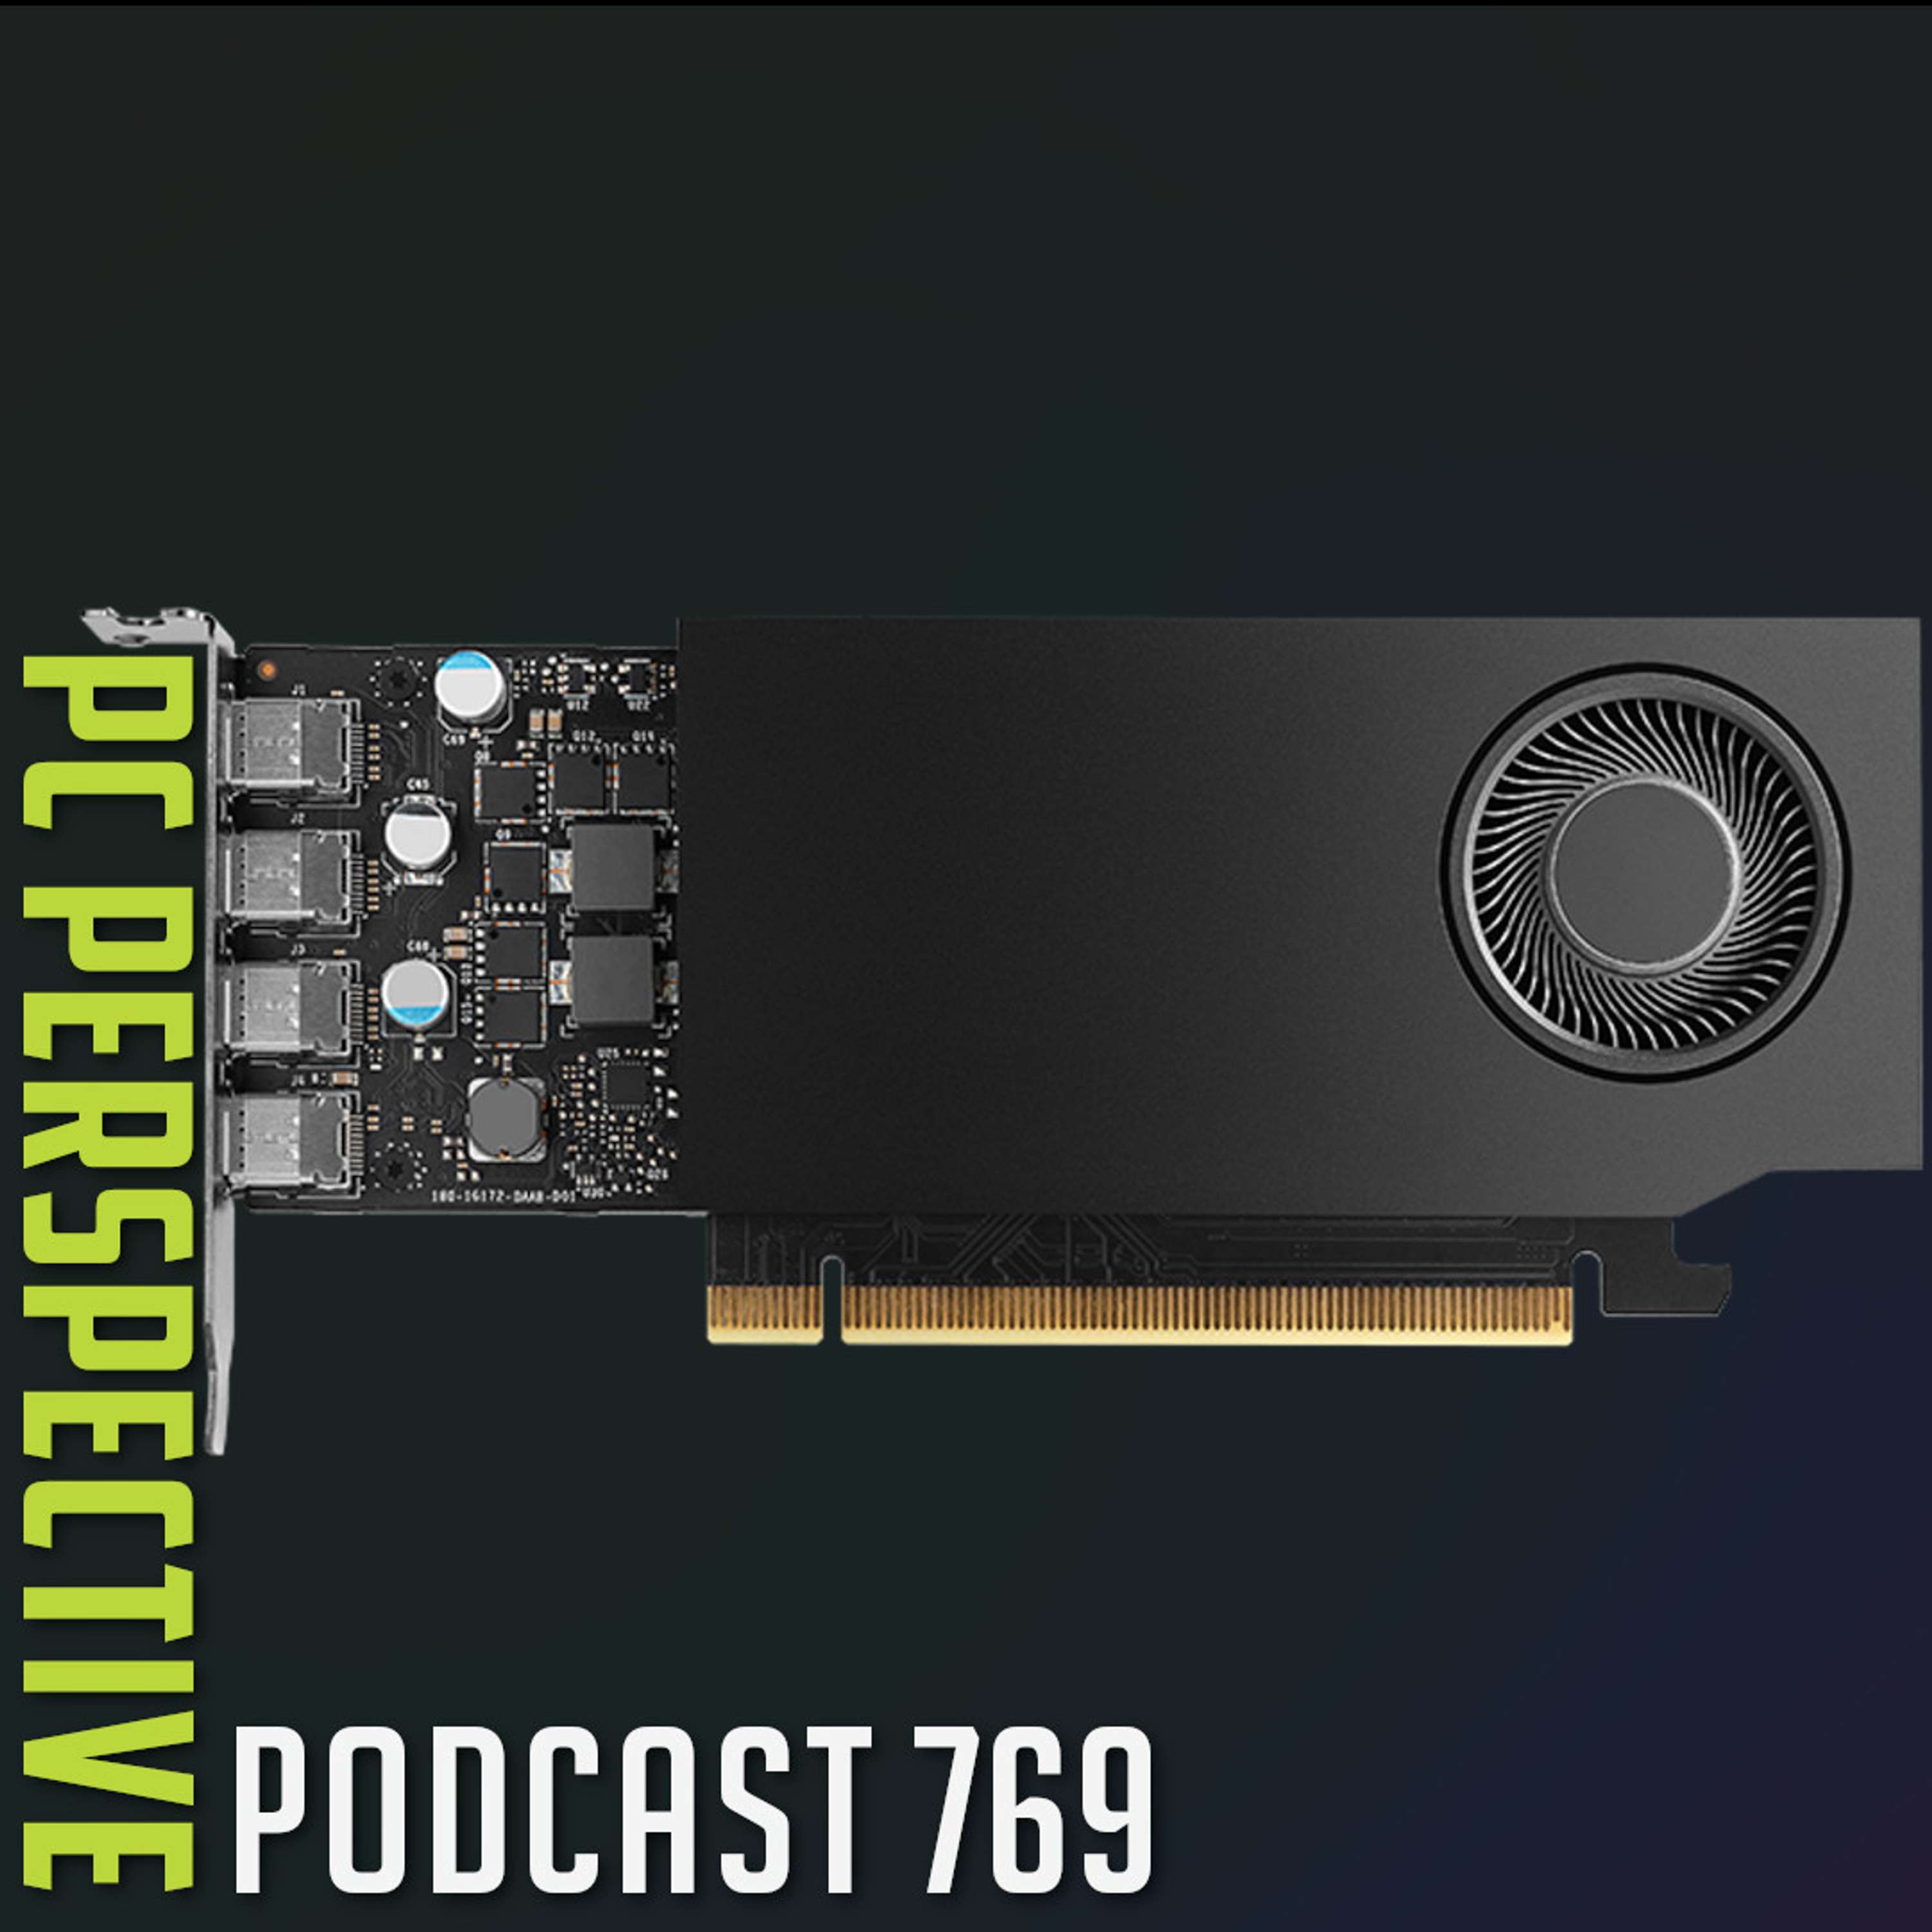 Podcast #769 - Ryzen 8000 CPUs, New 50 Watt RTX Cards, High-End Radeon RX 6000 GPUs Disappearing